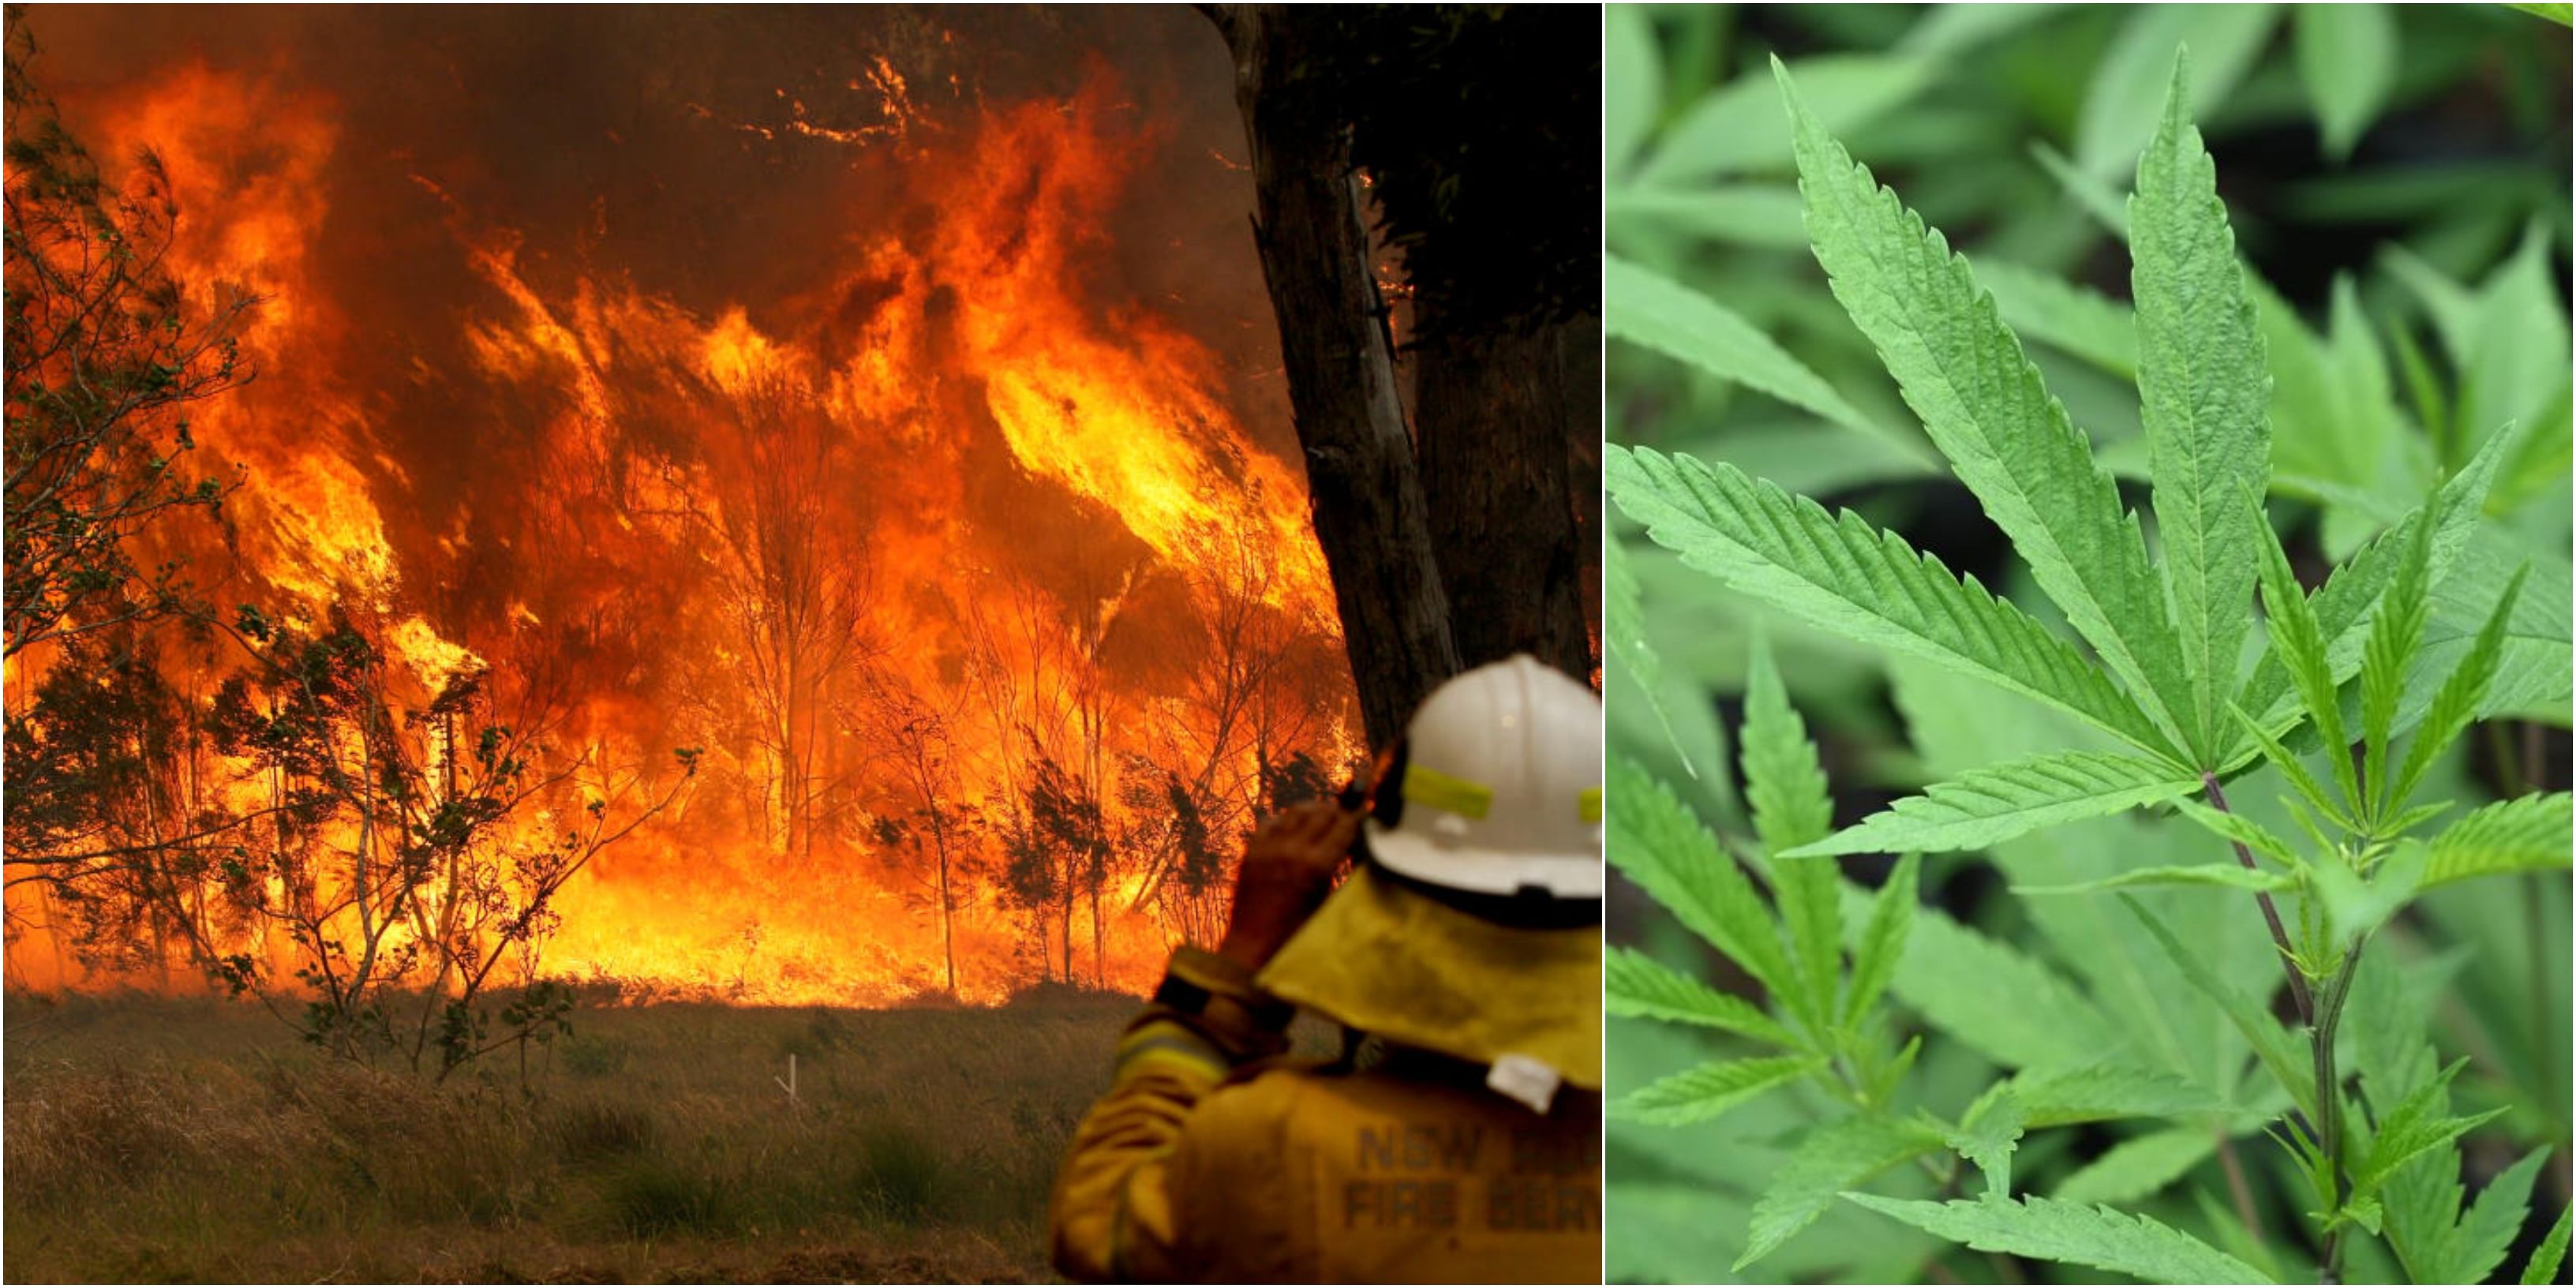 Police said a 51-year-old man appeared before a local court on Saturday charged with intentionally lighting a fire at Ebor in New South Wales state in an attempt to protect his cannabis crop.